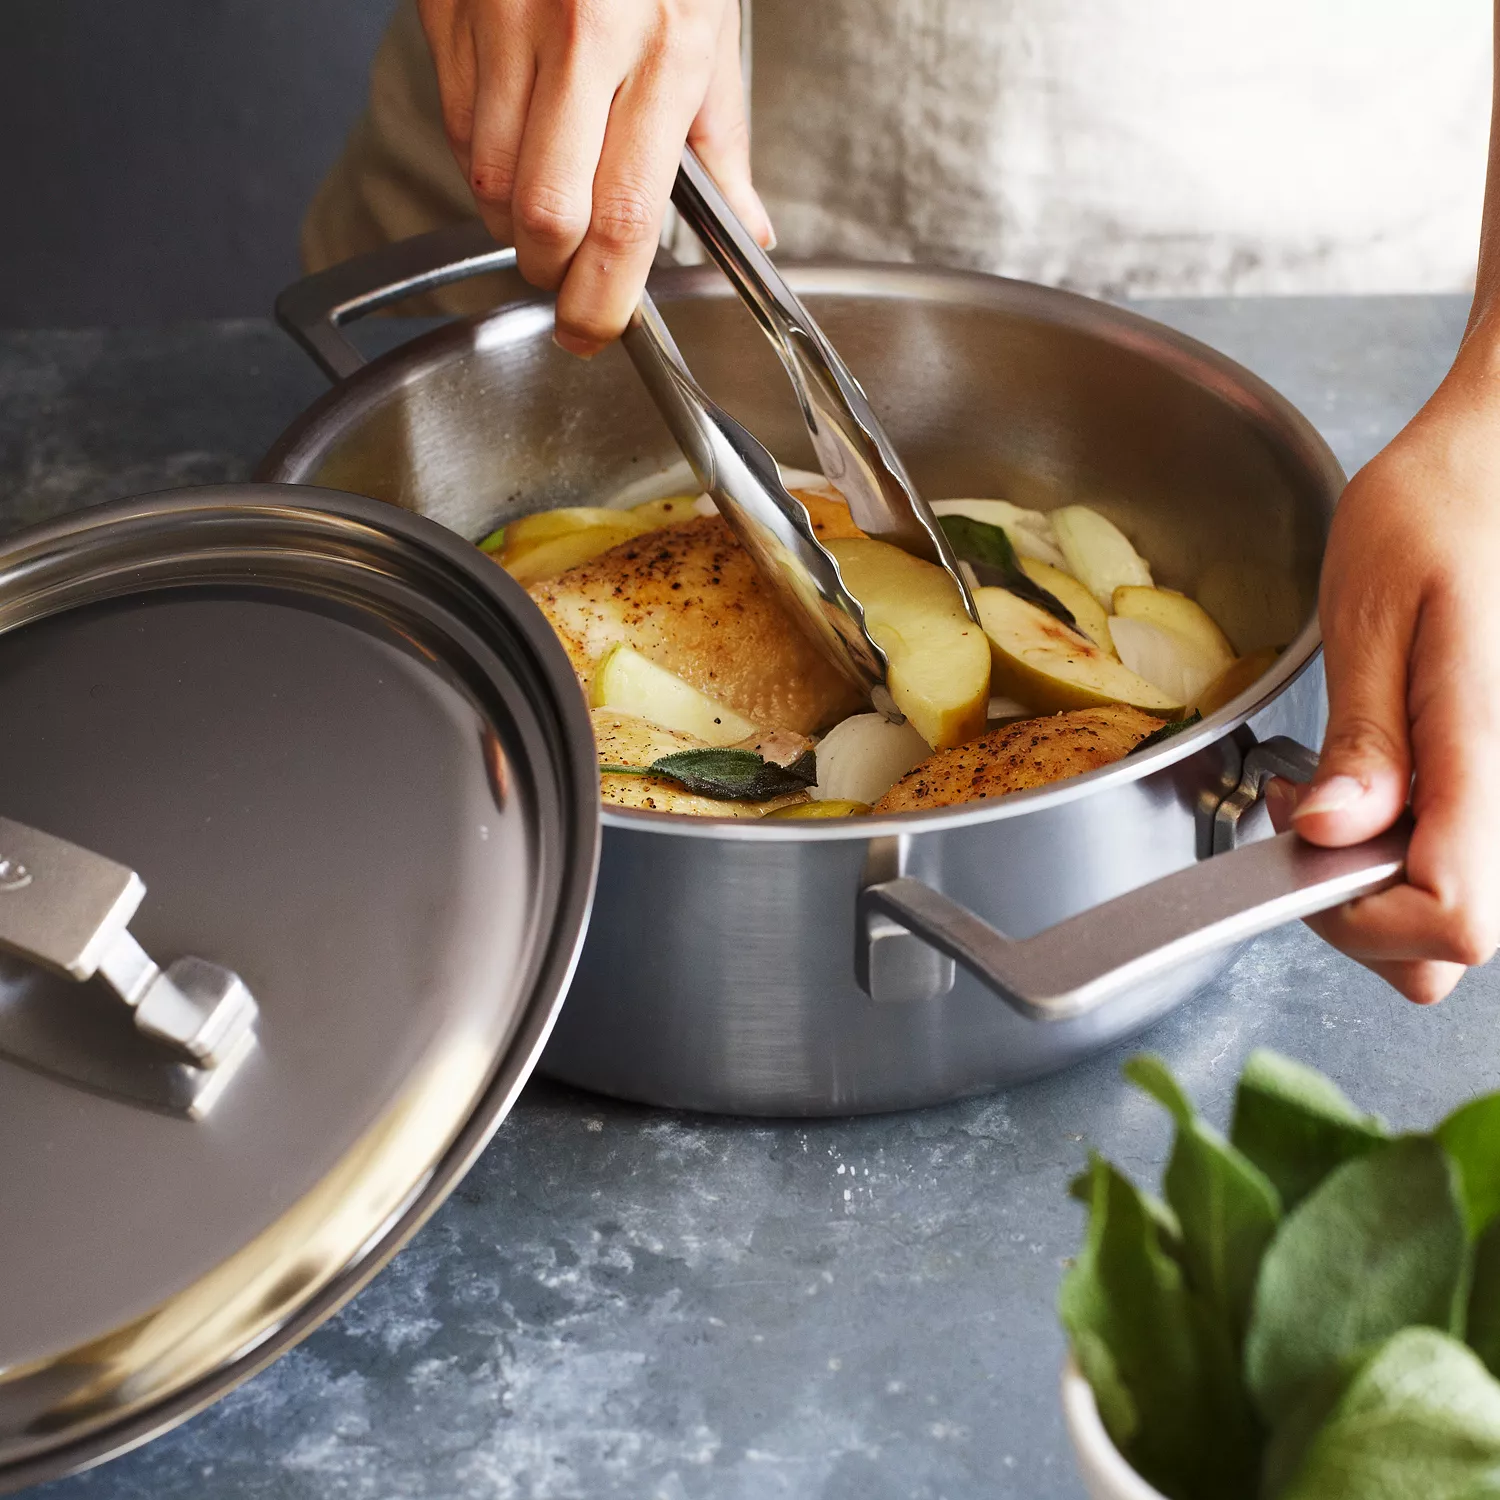 Demeyere Industry5 Stainless Steel Deep Sauté Pan with Double